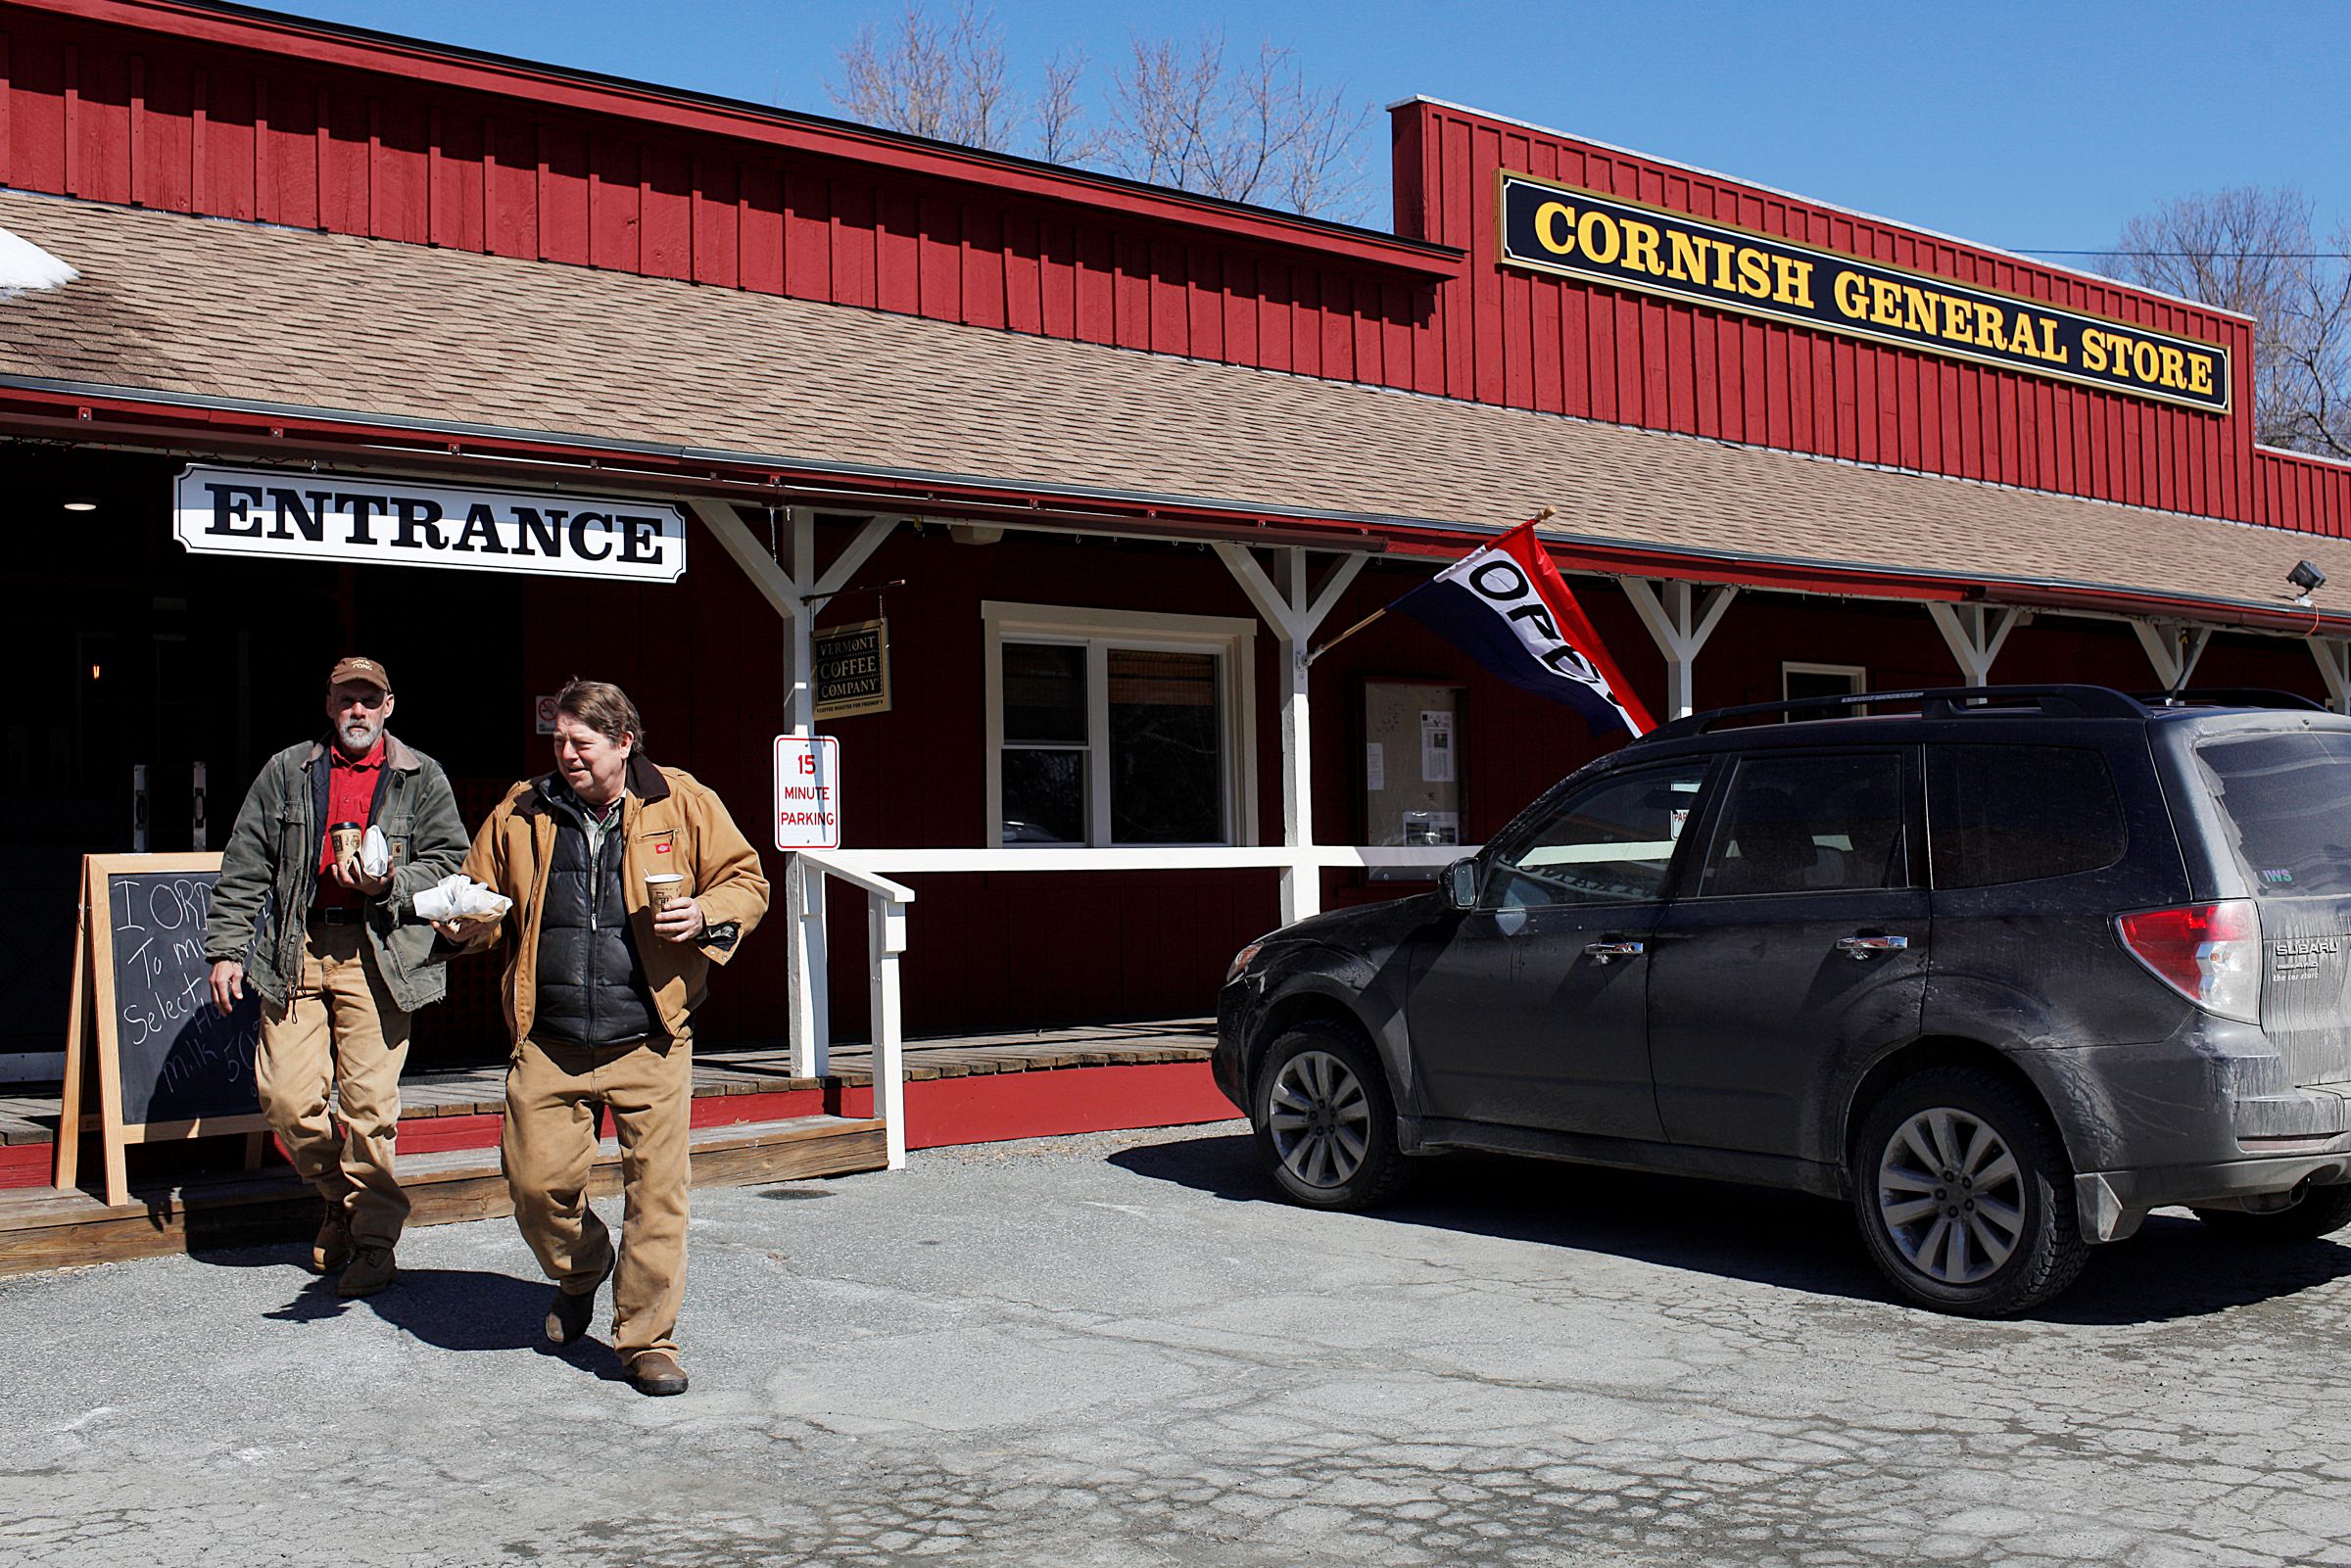 : OPEN FOR BUSINESSAfter buying lunch, electricians Rob Richardson, left, of Gilmanton, N.H., and Andy Sanborn, of Sanbornton, N.H., leave the newly reopened Cornish General Store.